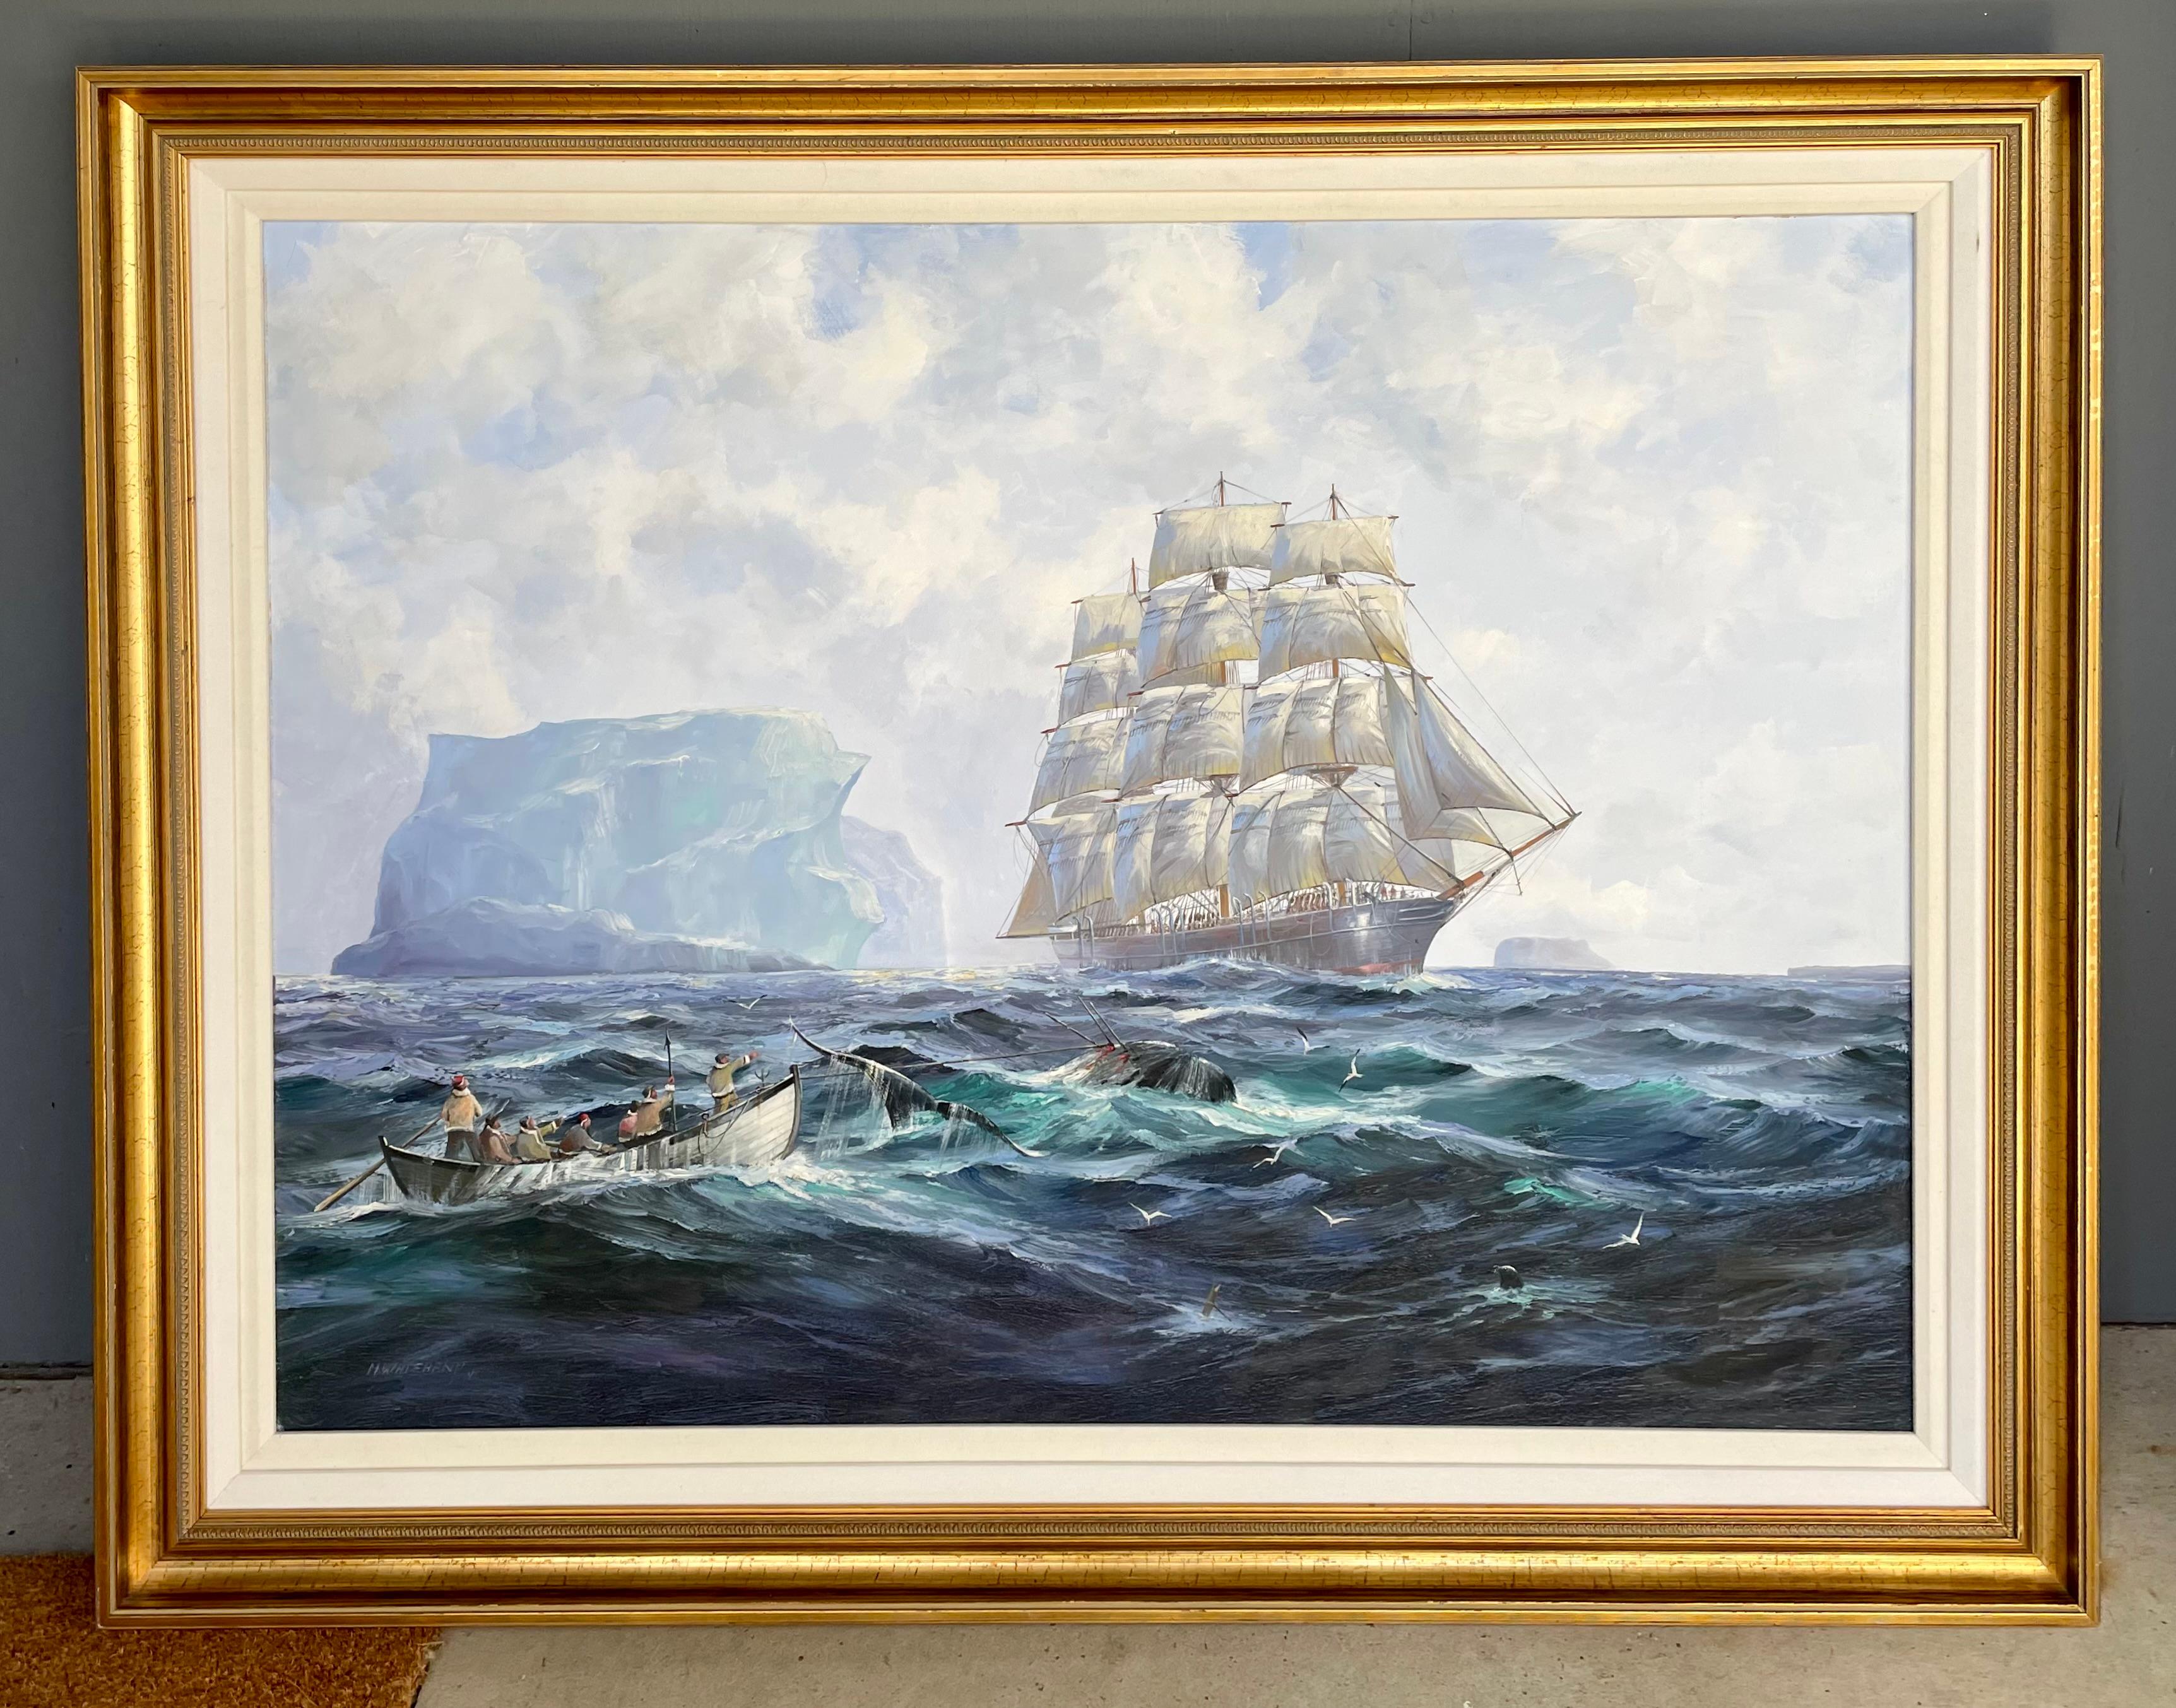 whaling ship clipper 1846